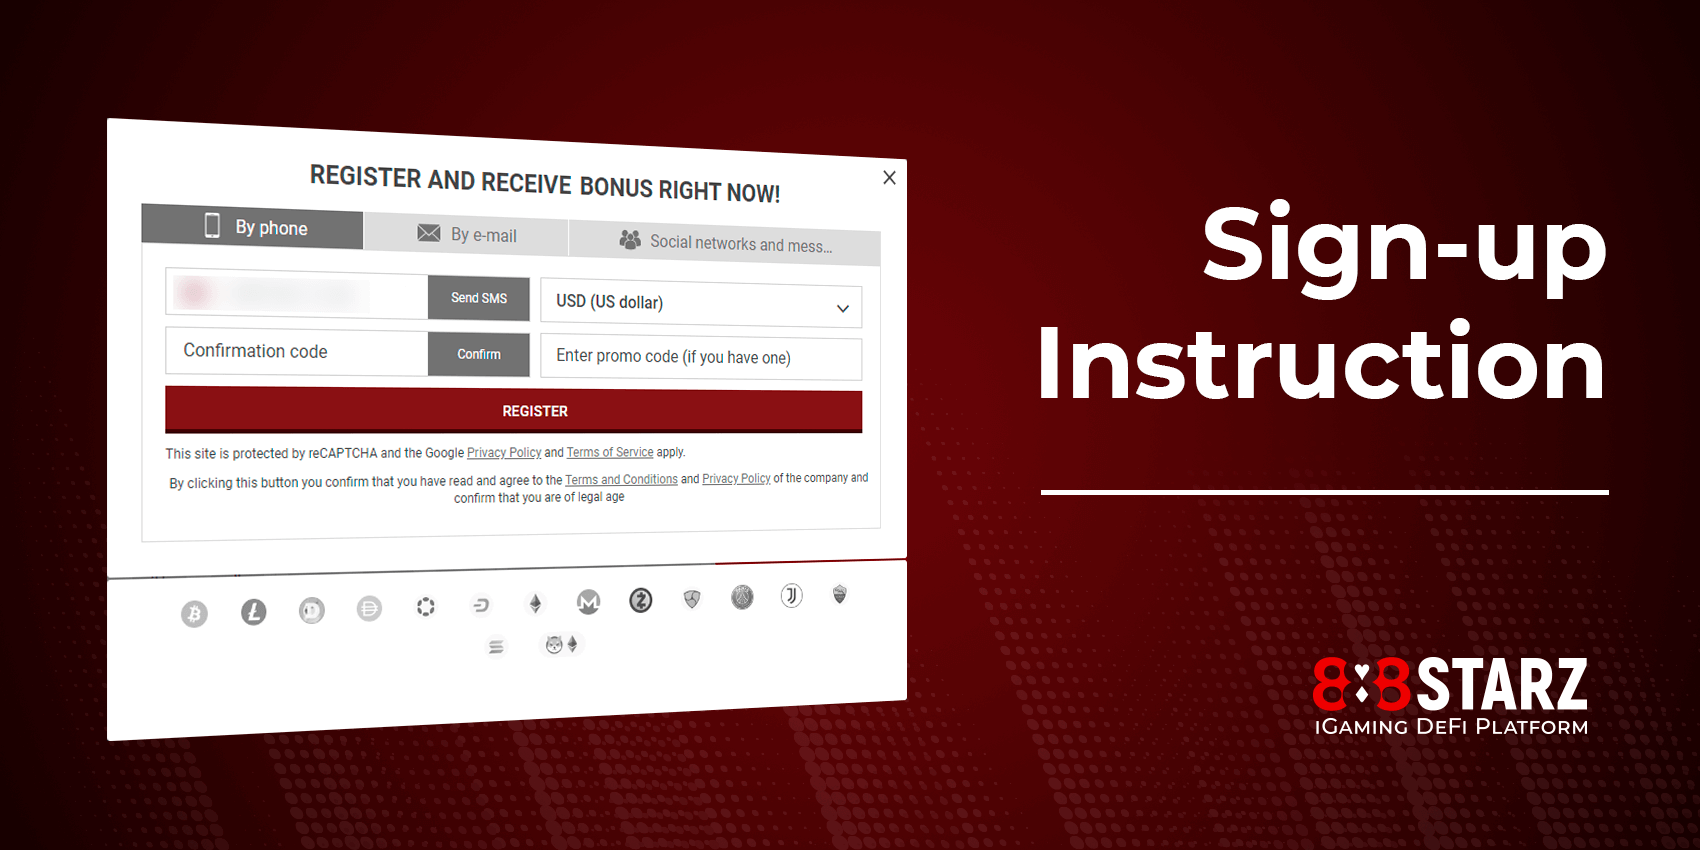 Sign up instruction step by step